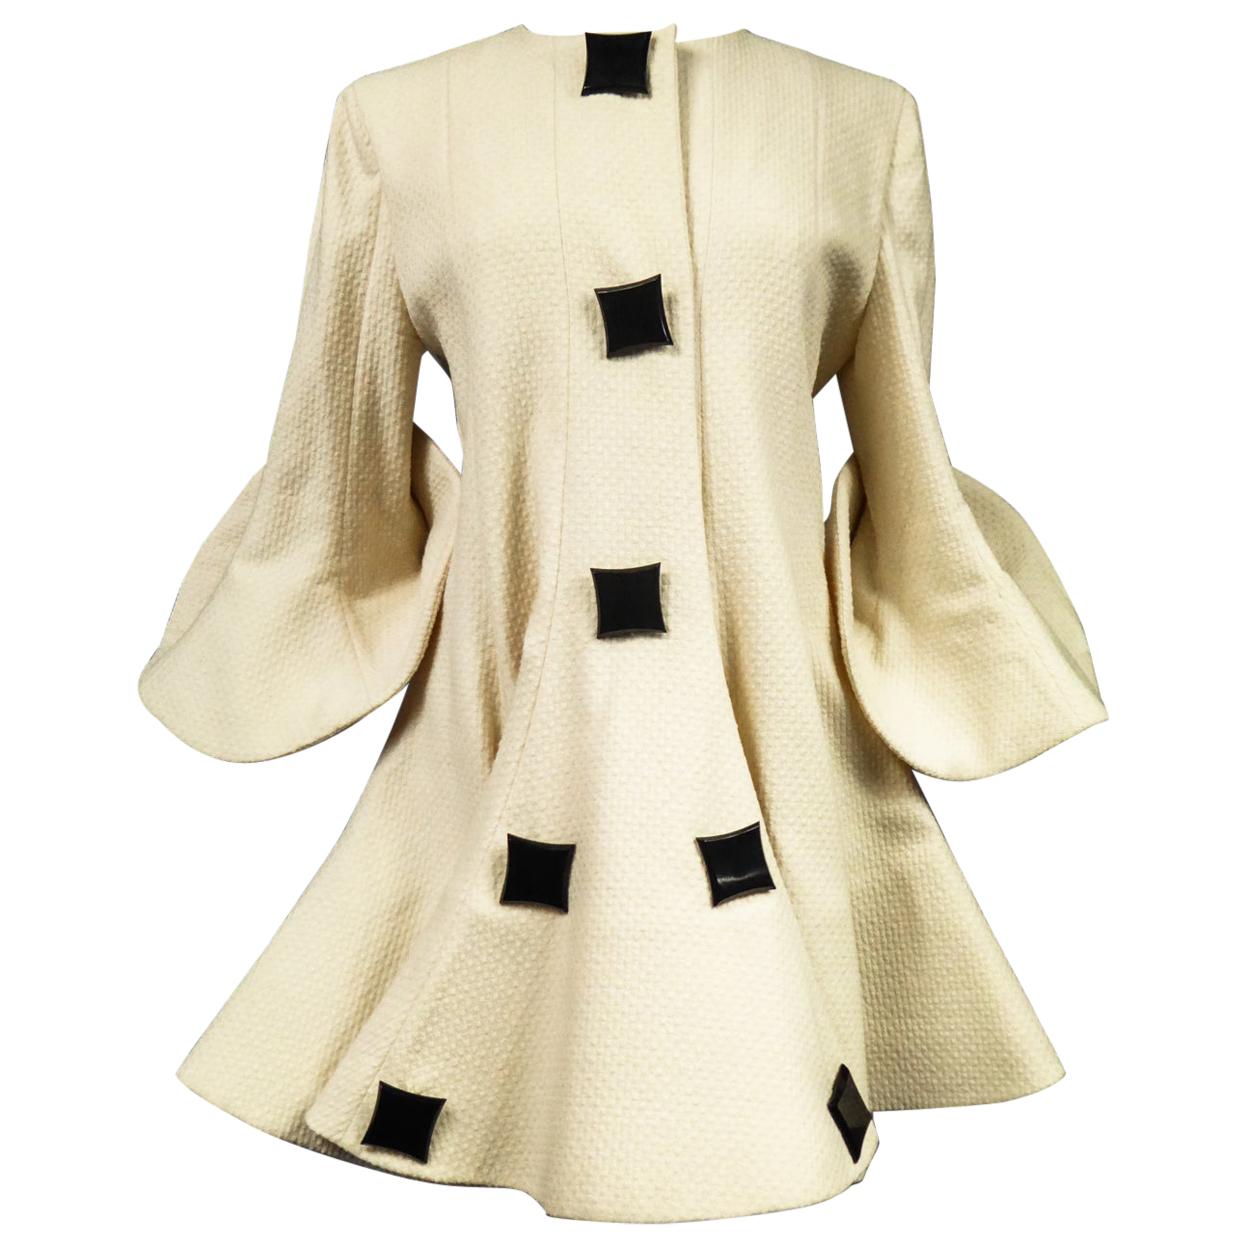 A Pierre Cardin Couture Wool Coat in Corolla Circa 1990 with Provenance